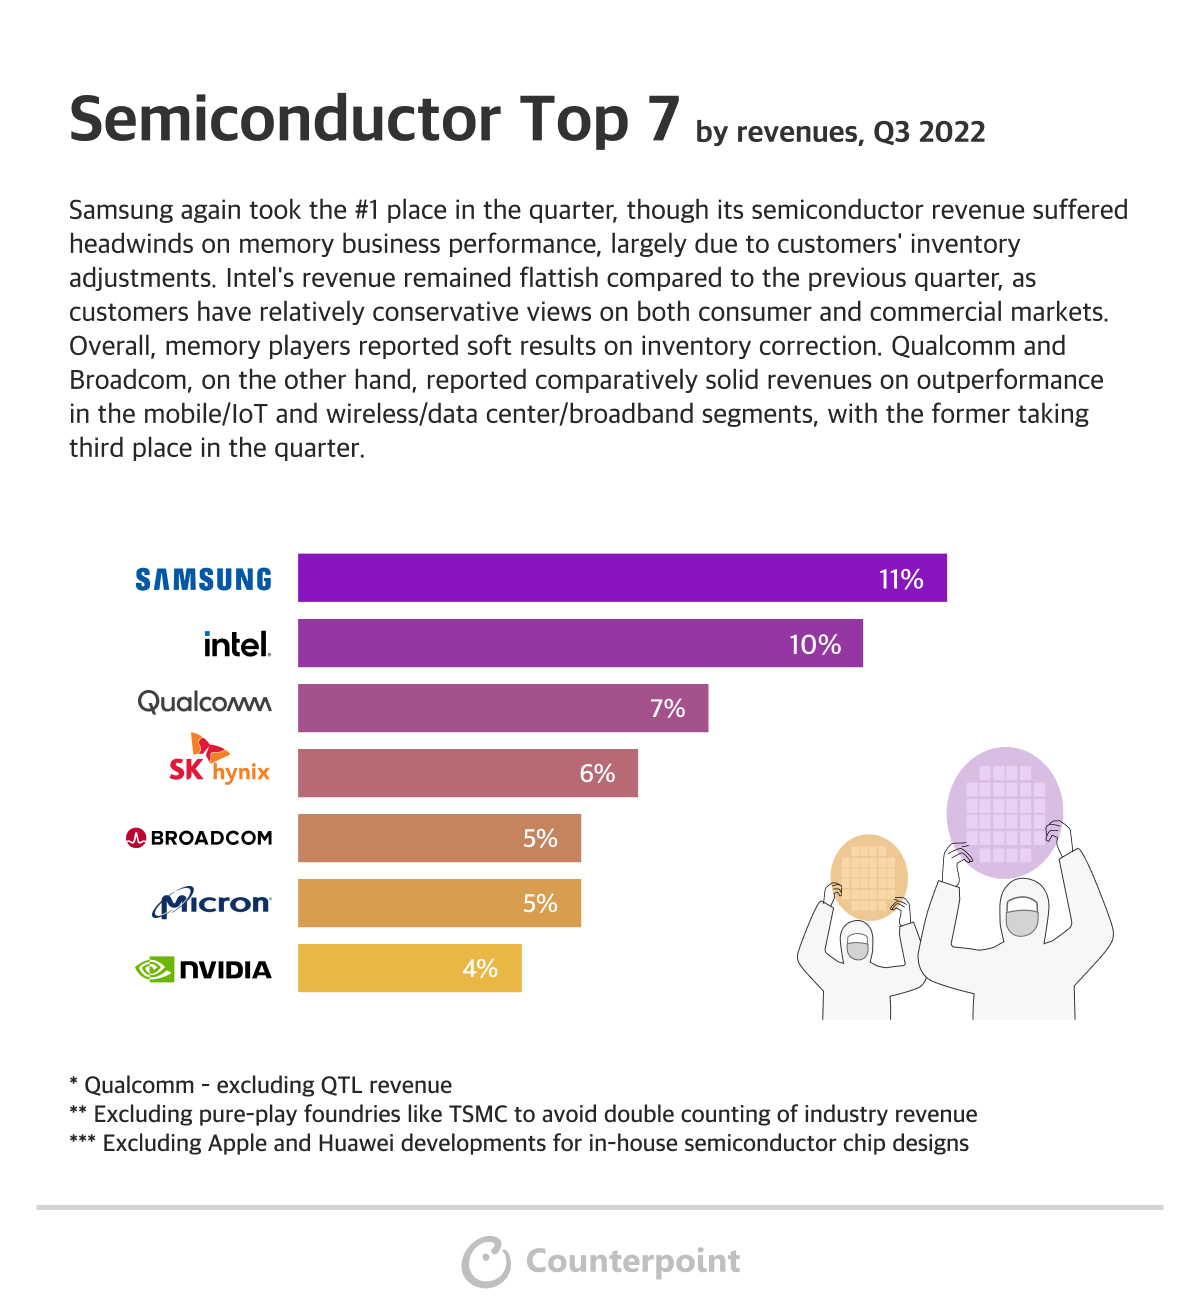 Counterpoint Semiconductor Top 7 Q3 2022